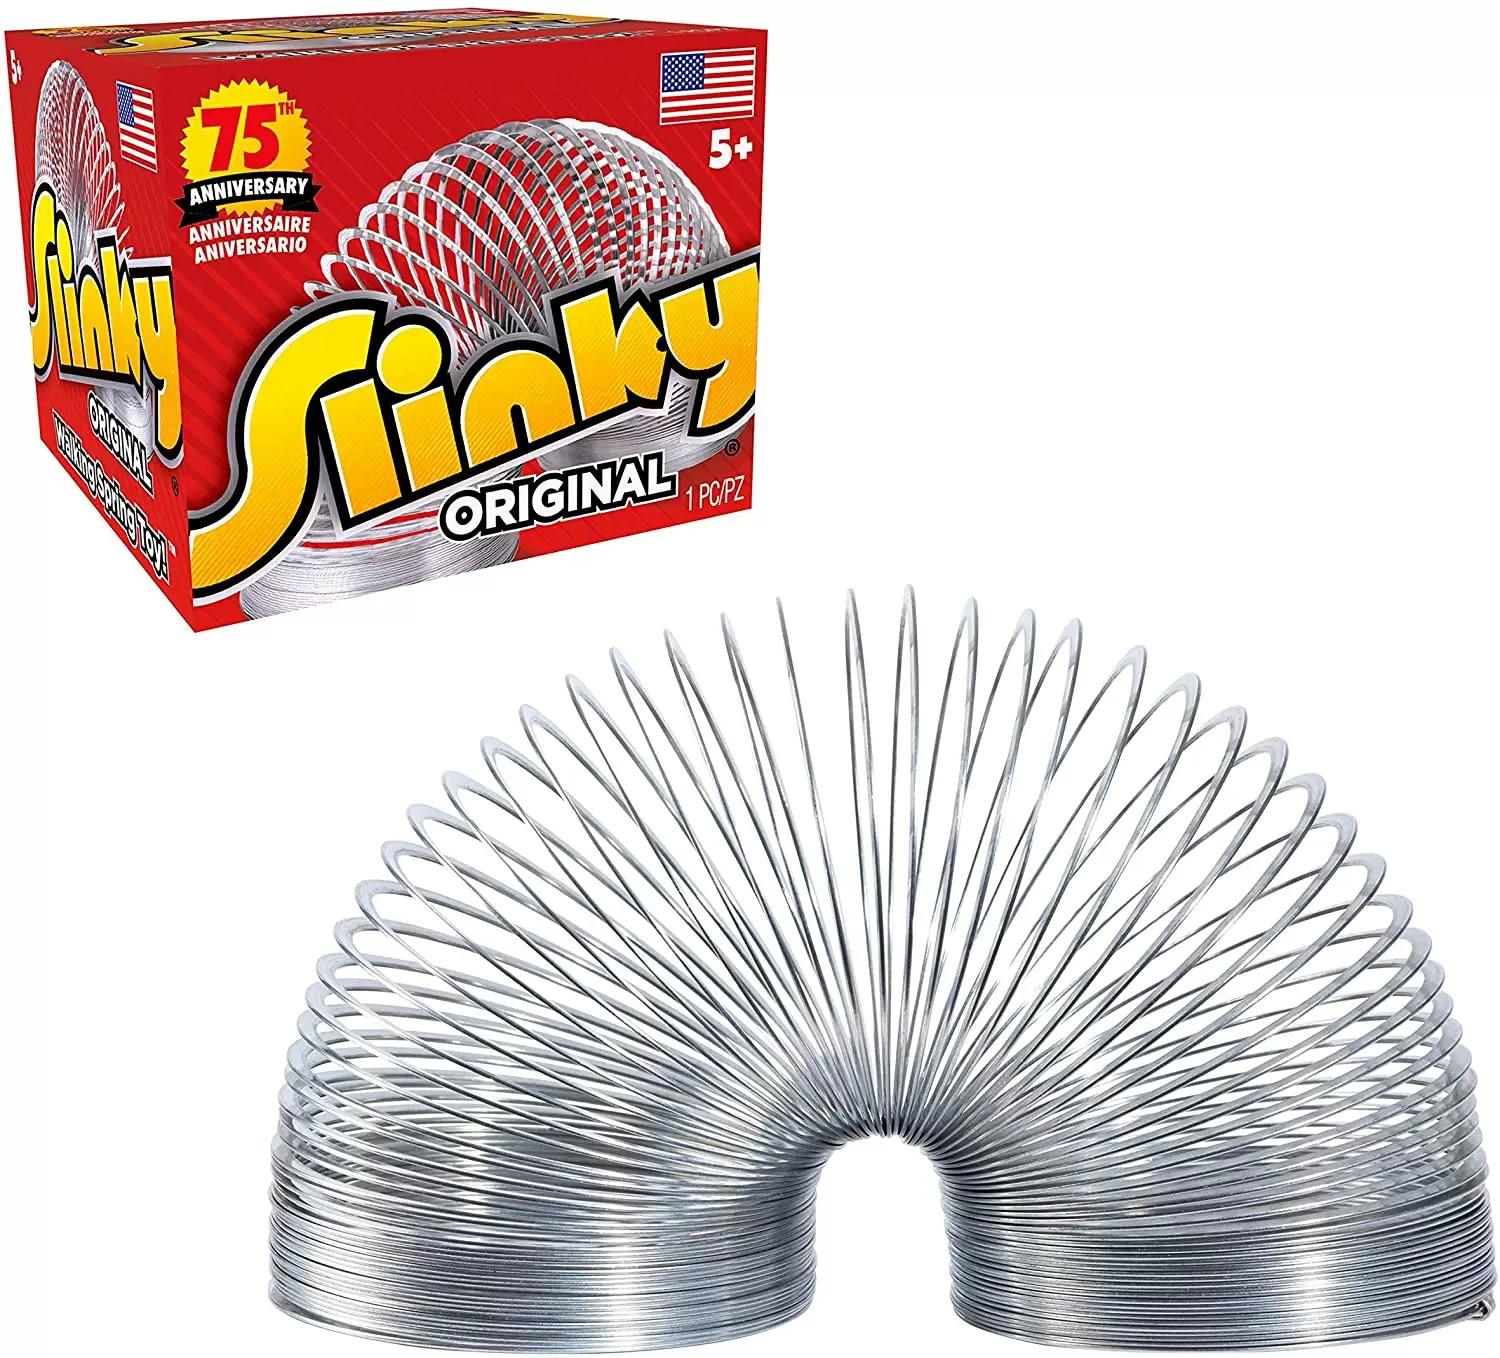 Original Slinky Classic 75th Anniversary Edition Toy for $1.99